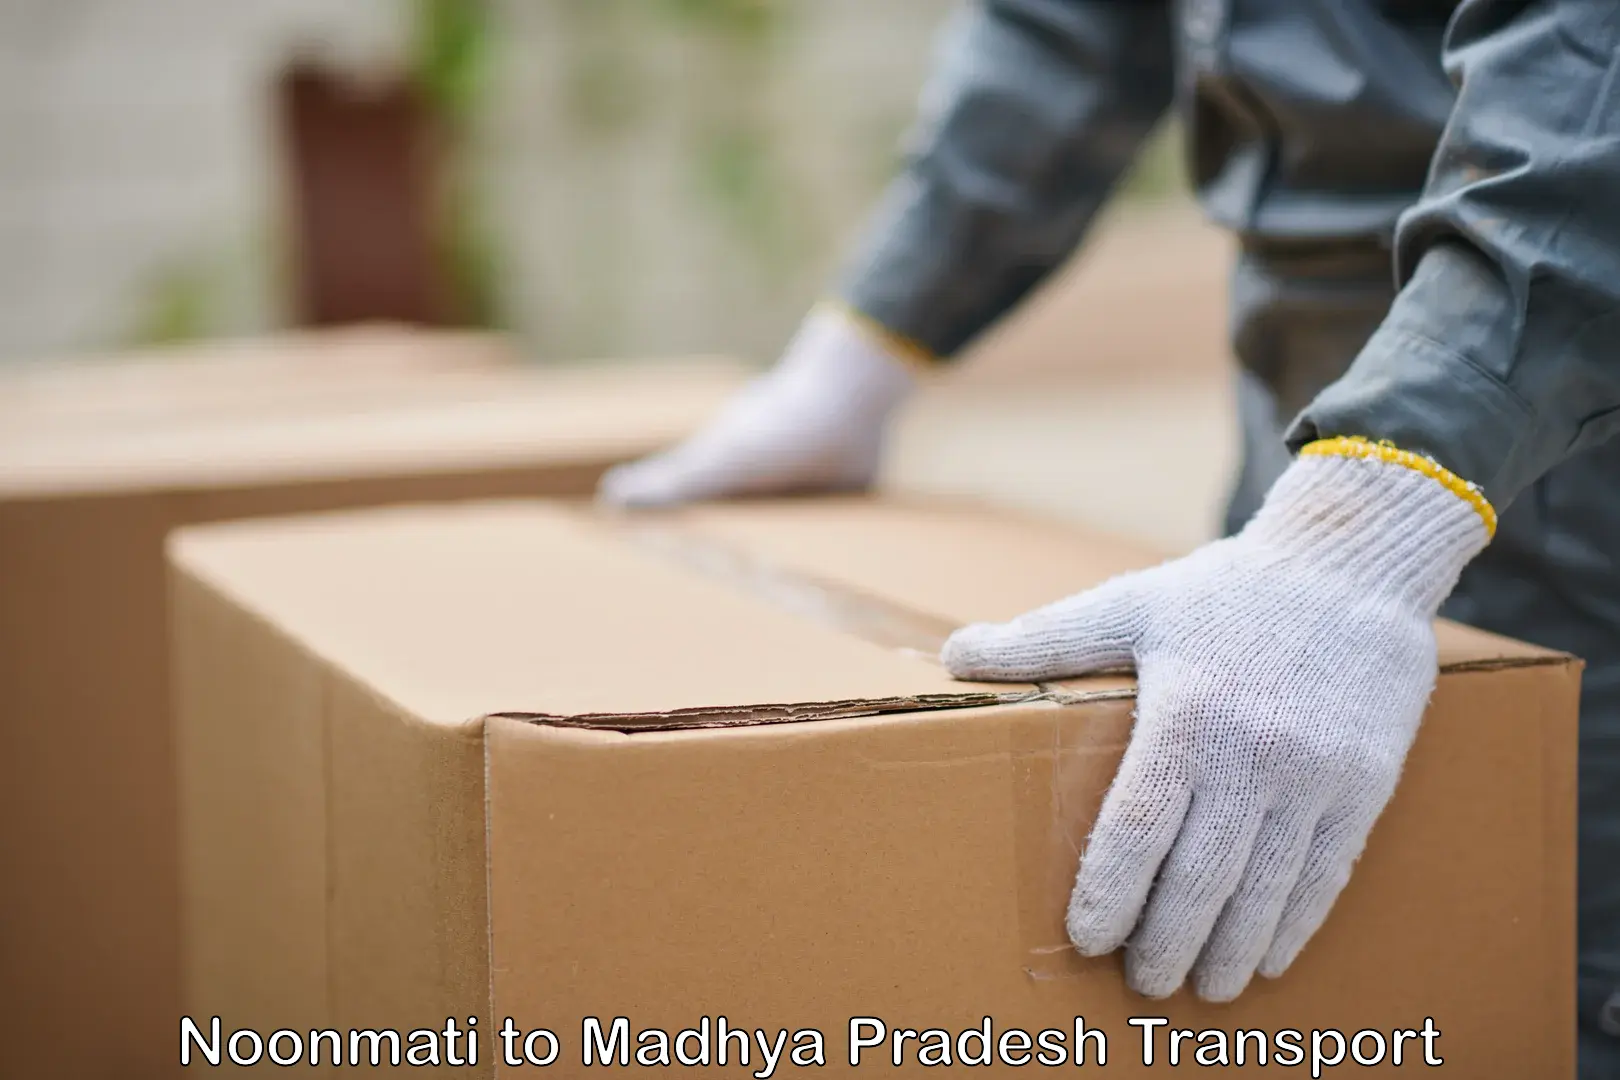 Transportation services Noonmati to Indore